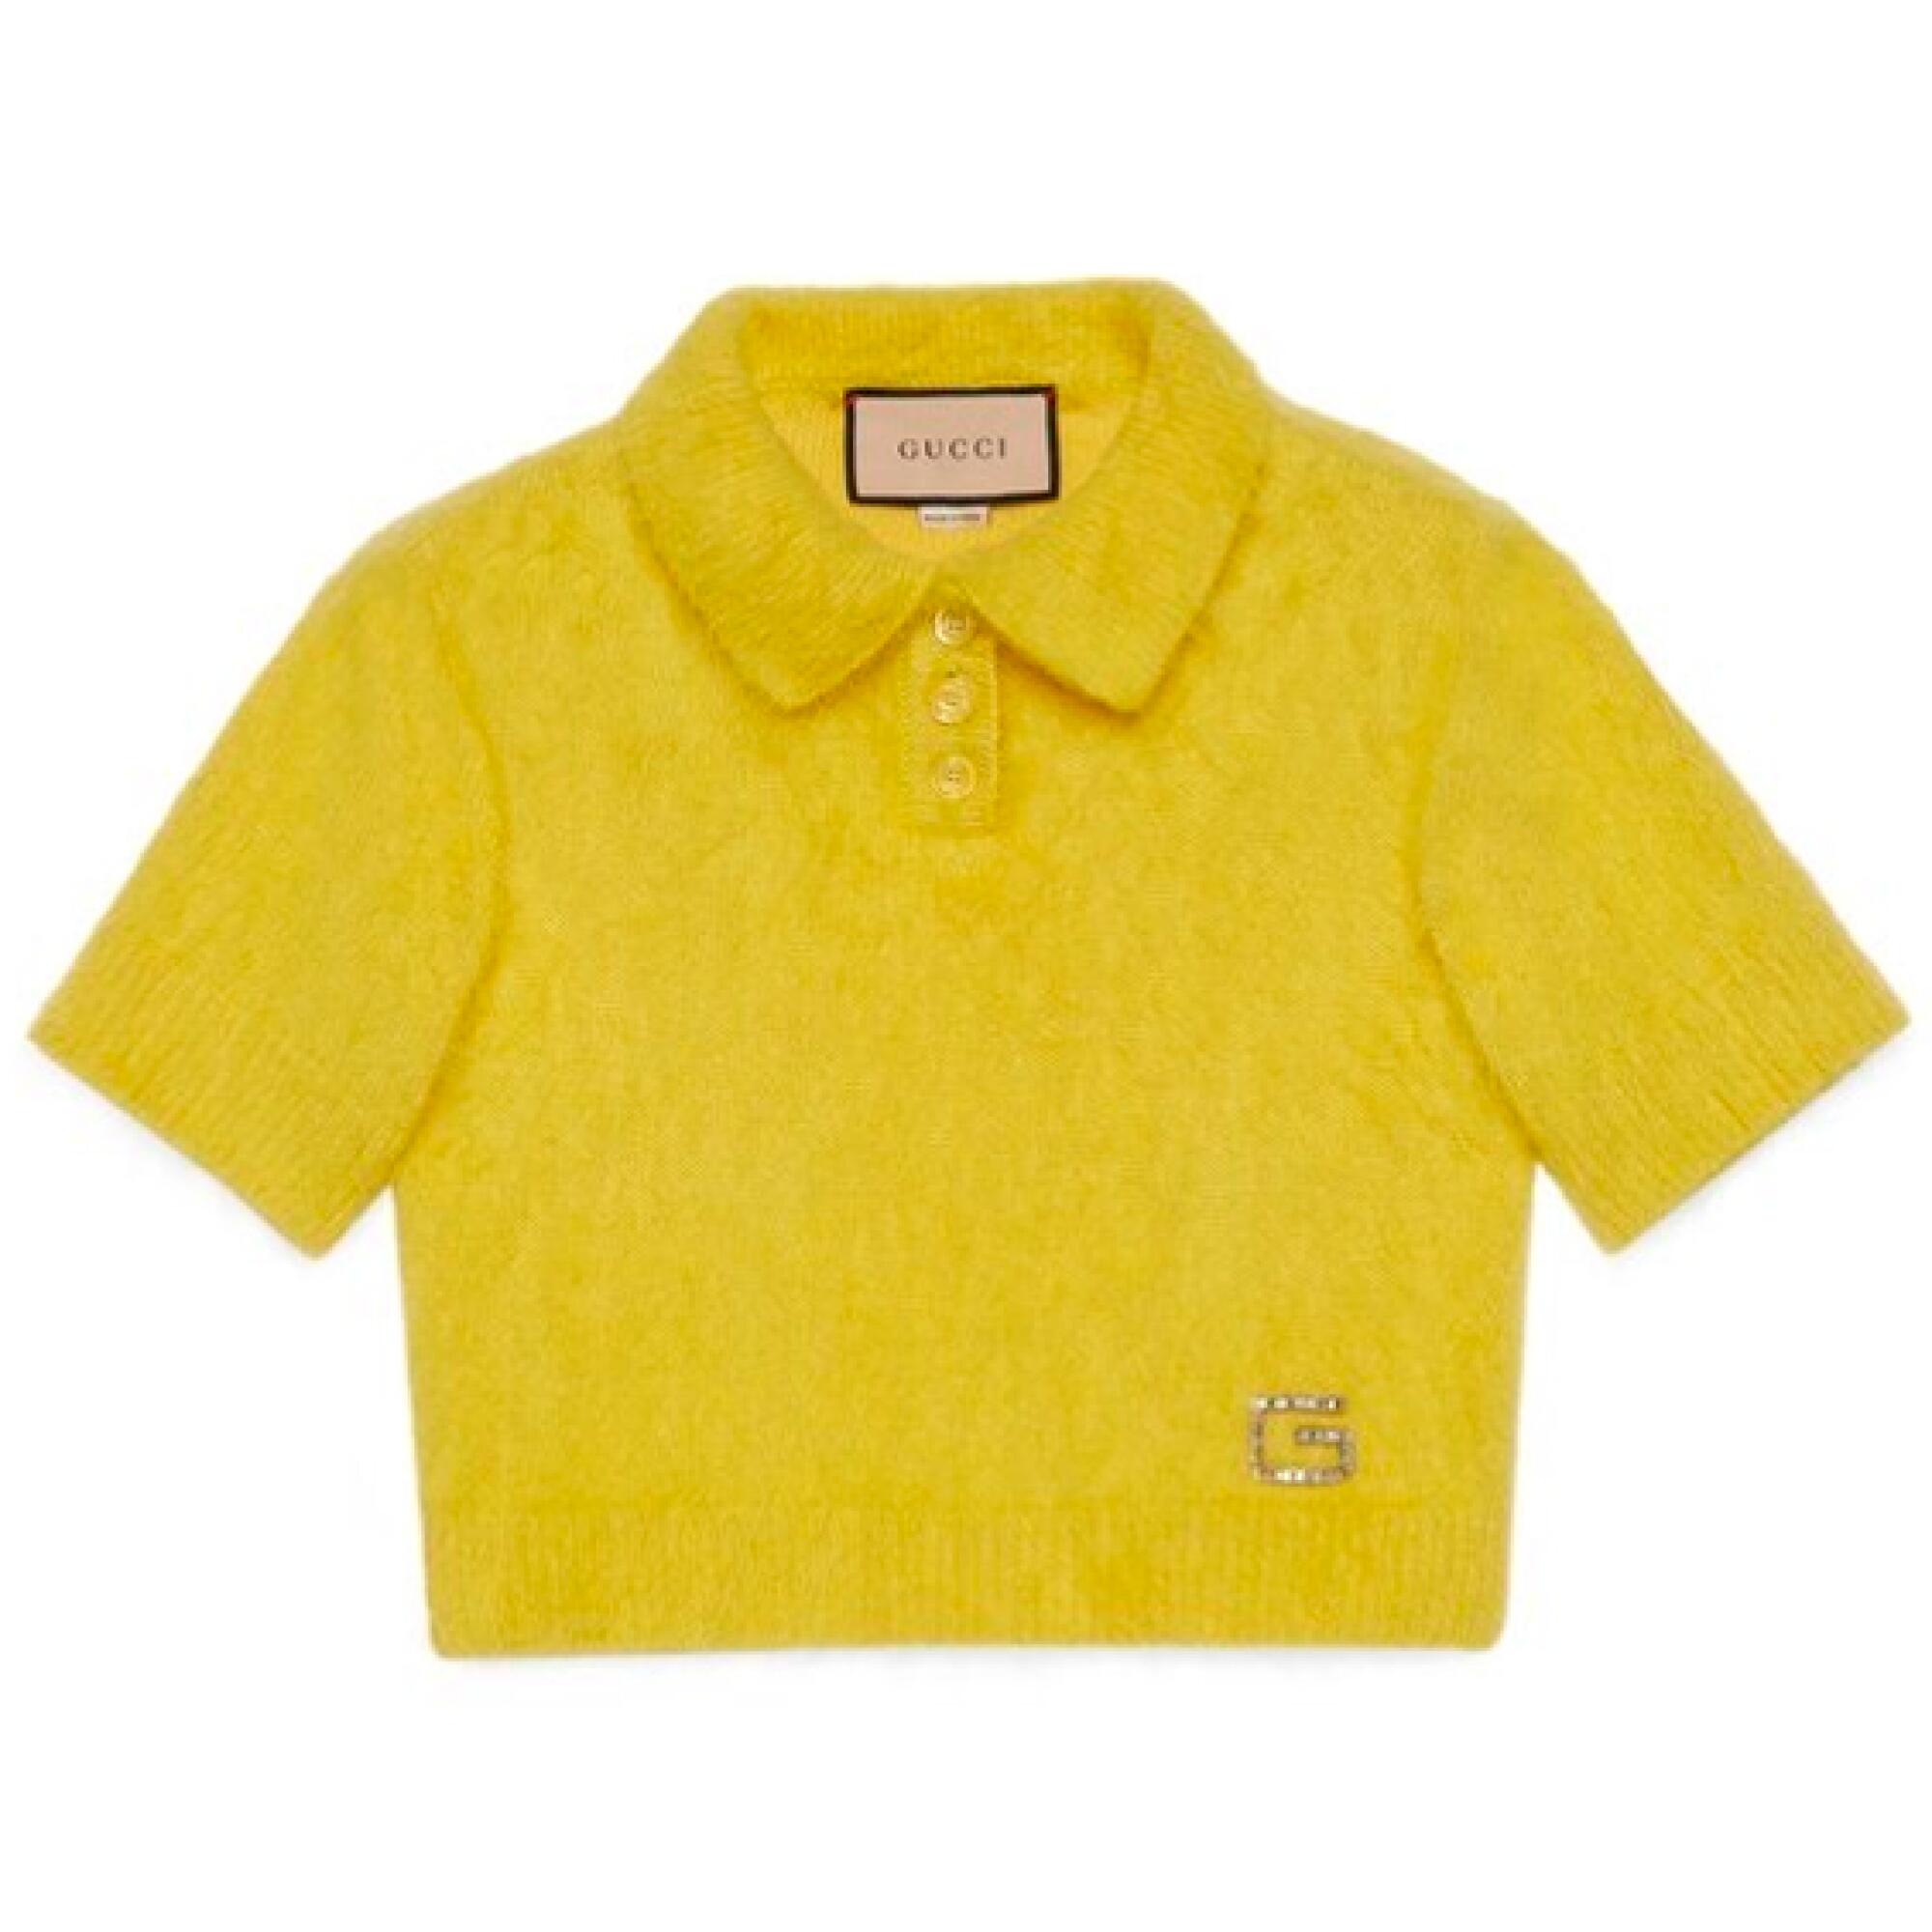 Gucci Silk, Cashmere and Mohair Polo Sweater, $1,650 Using the finest fabrics, Gucci's cashmere polo ensures maximum levels